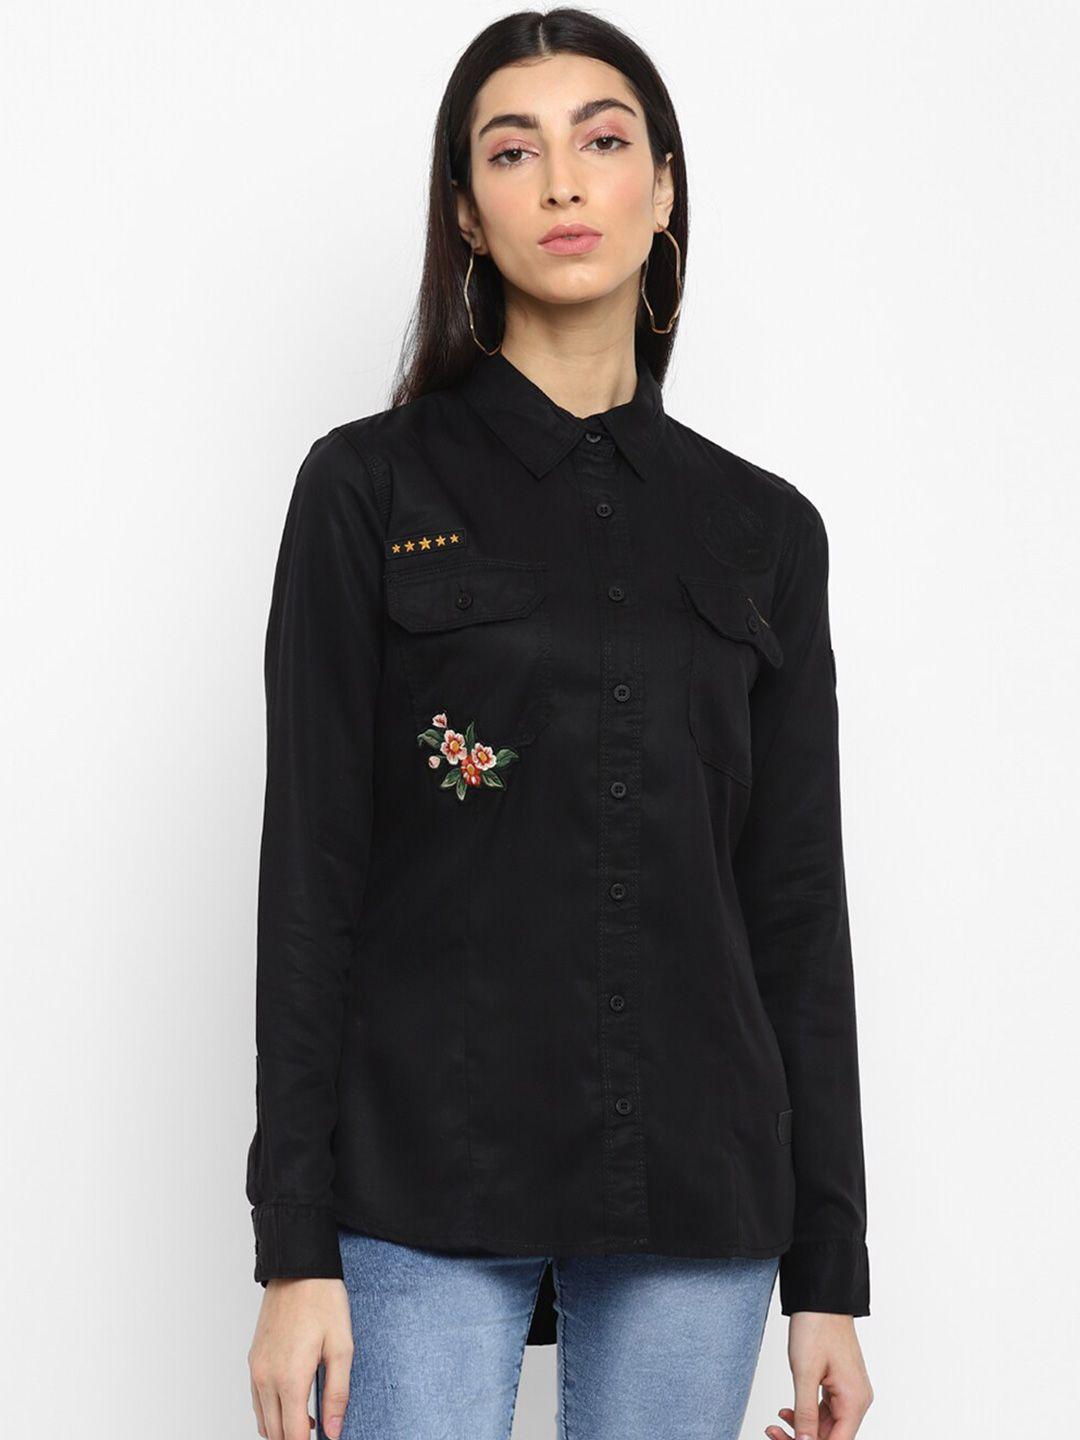 royal enfield women black embroidered casual shirt